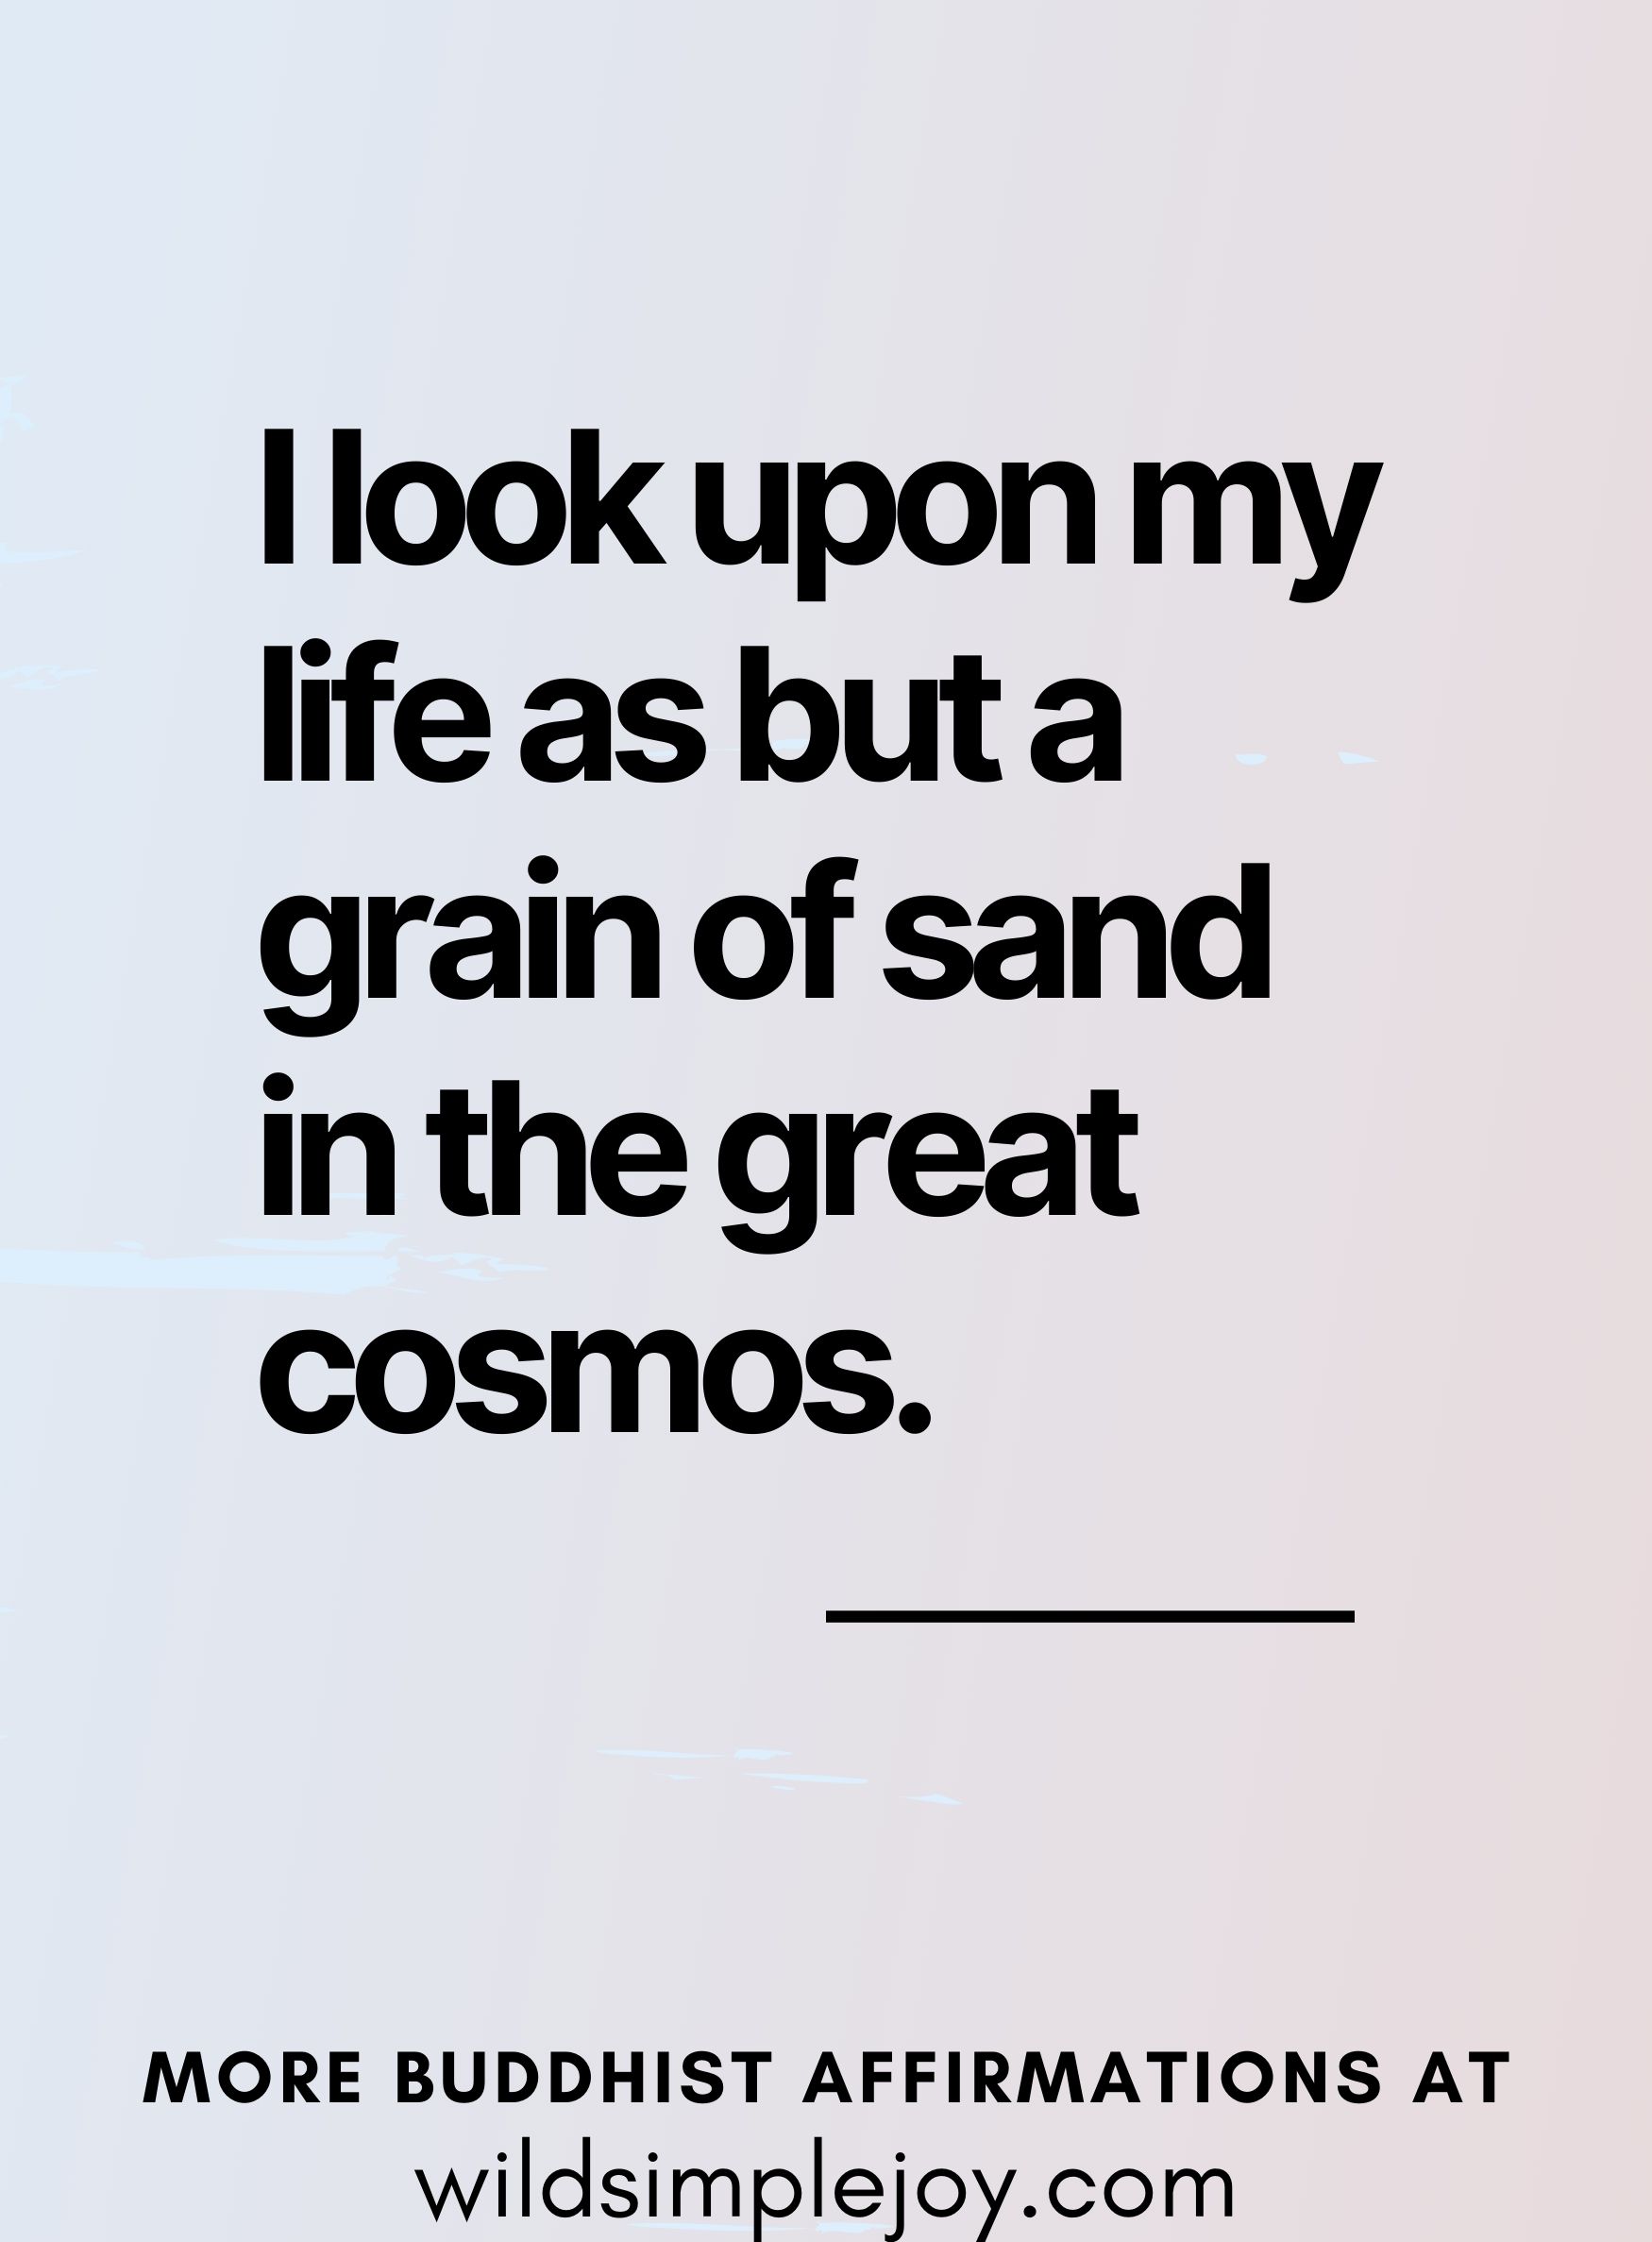 I look upon my life as but a grain of sand in the great cosmos. (on a blue and orange background)